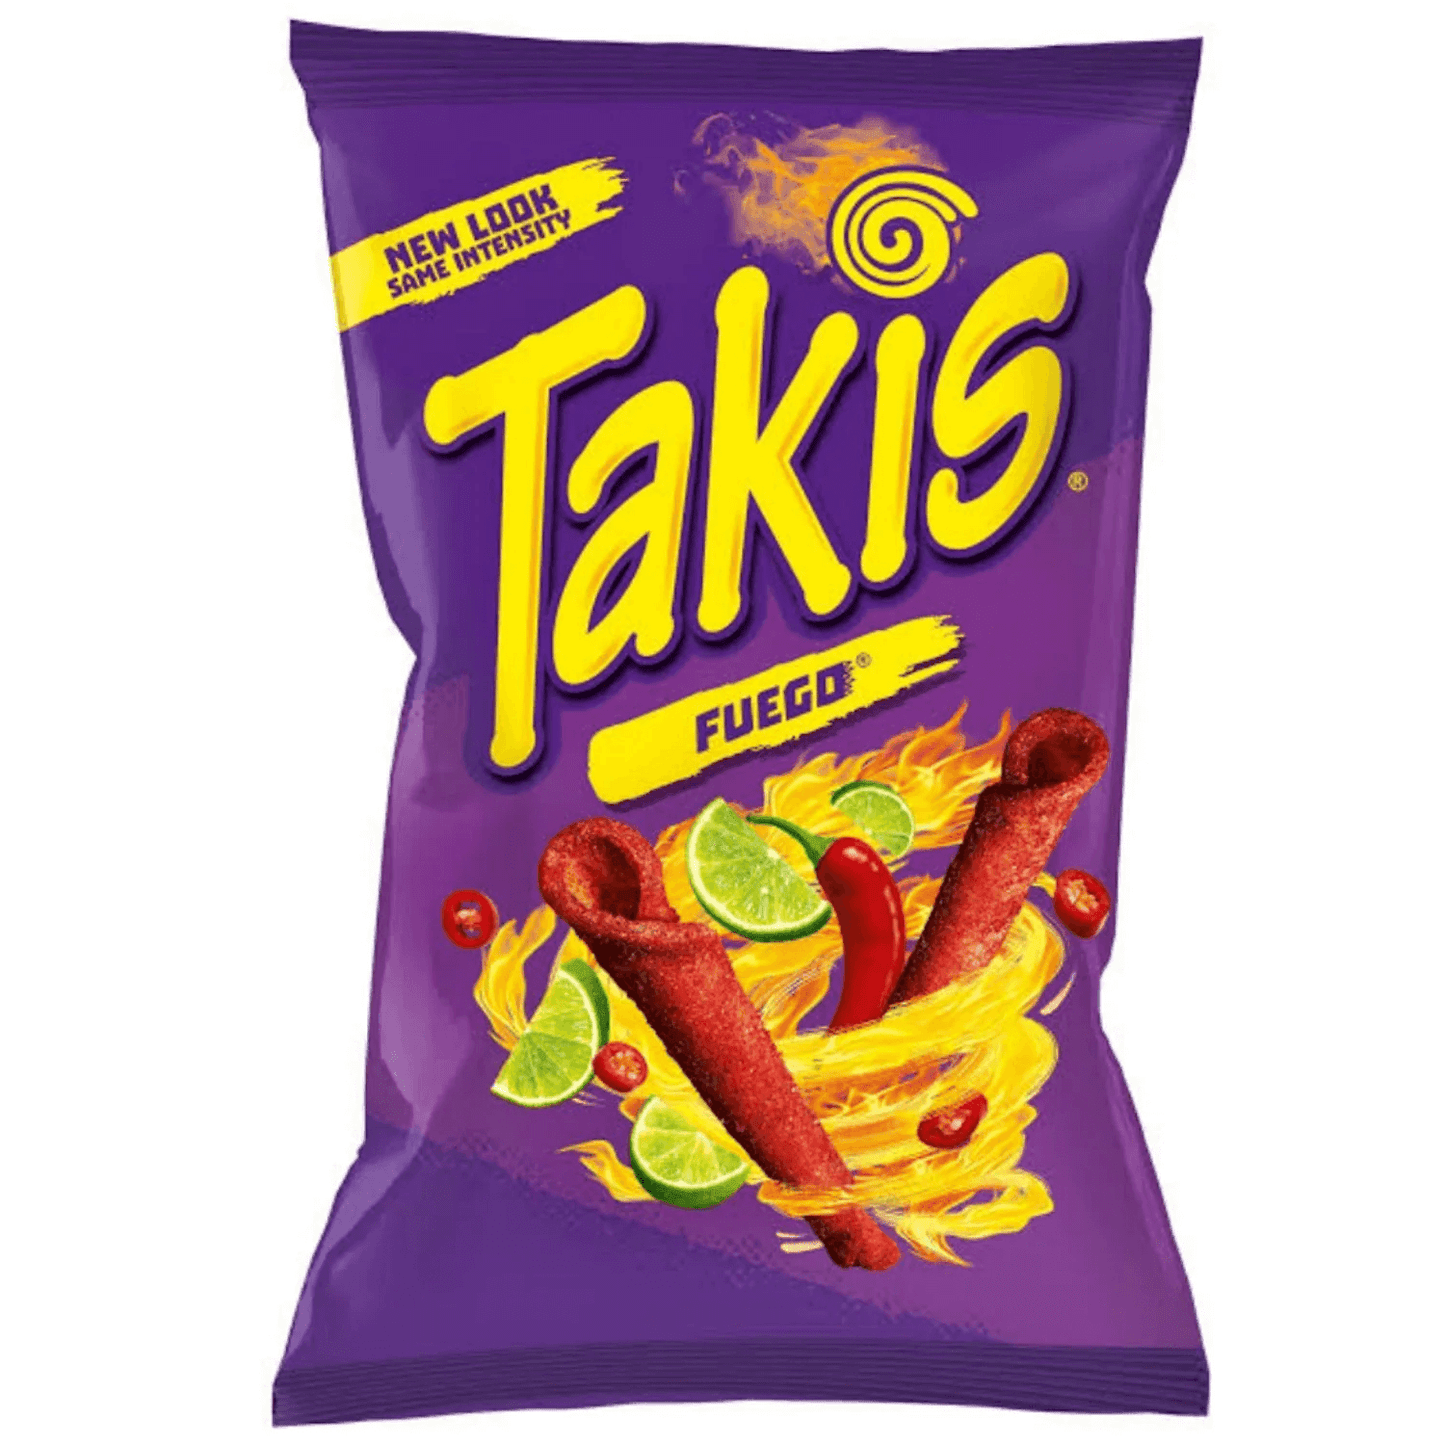 Takis Chips - Many Flavours - Sugar Party